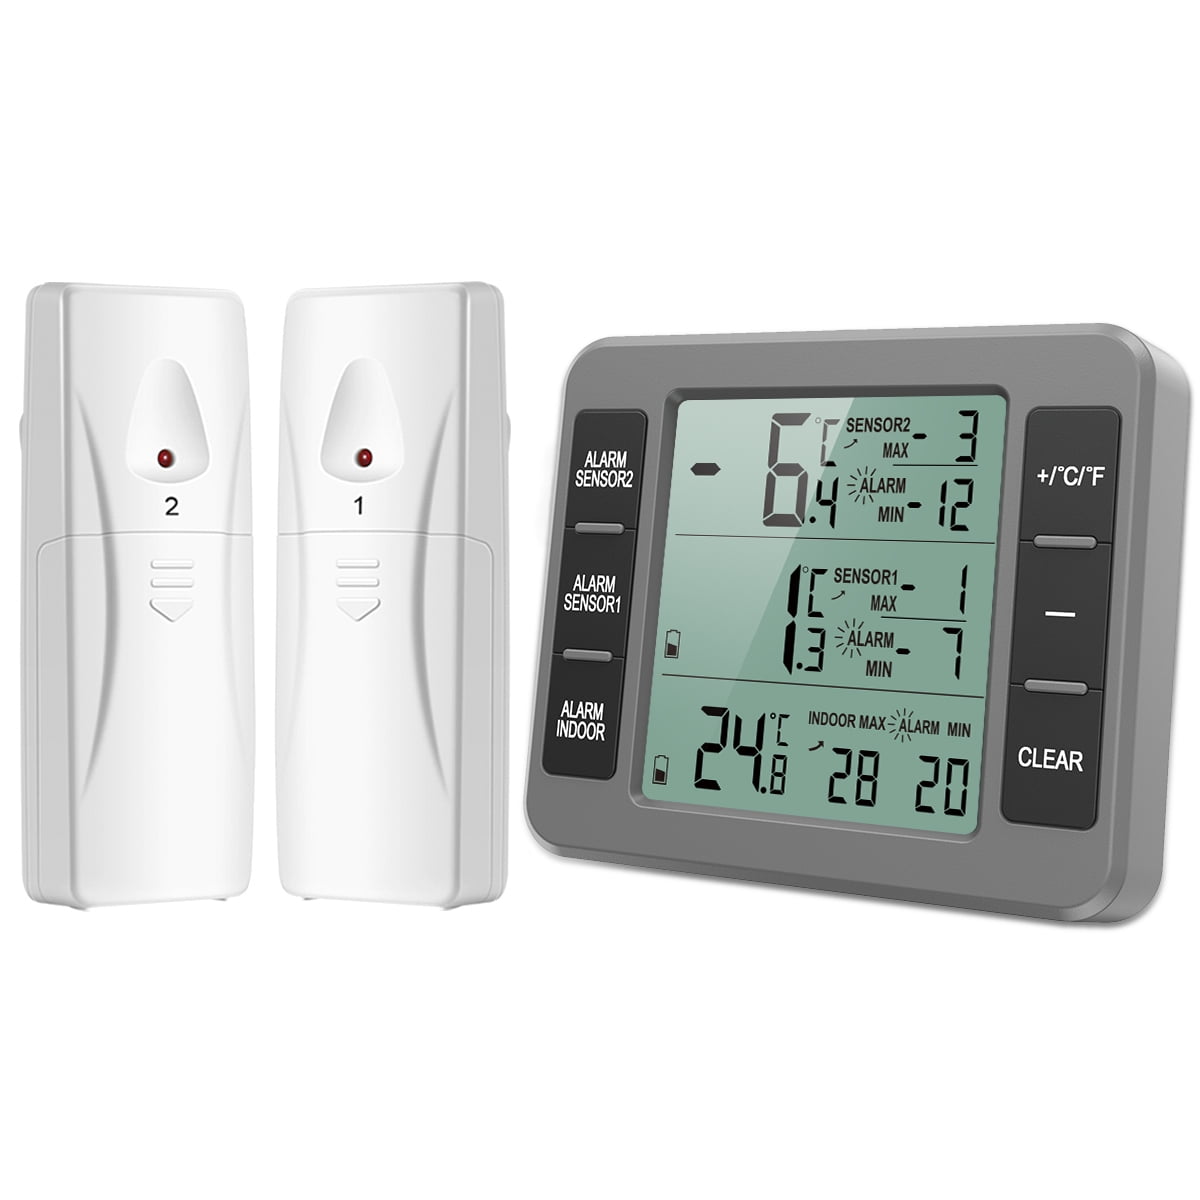 YH-SN010 Electronic thermometer New Wireless Indoor and Outdoor Thermometer  Digital Wireless Refrigerator Thermometer Cold Storage,Digital Thermometer